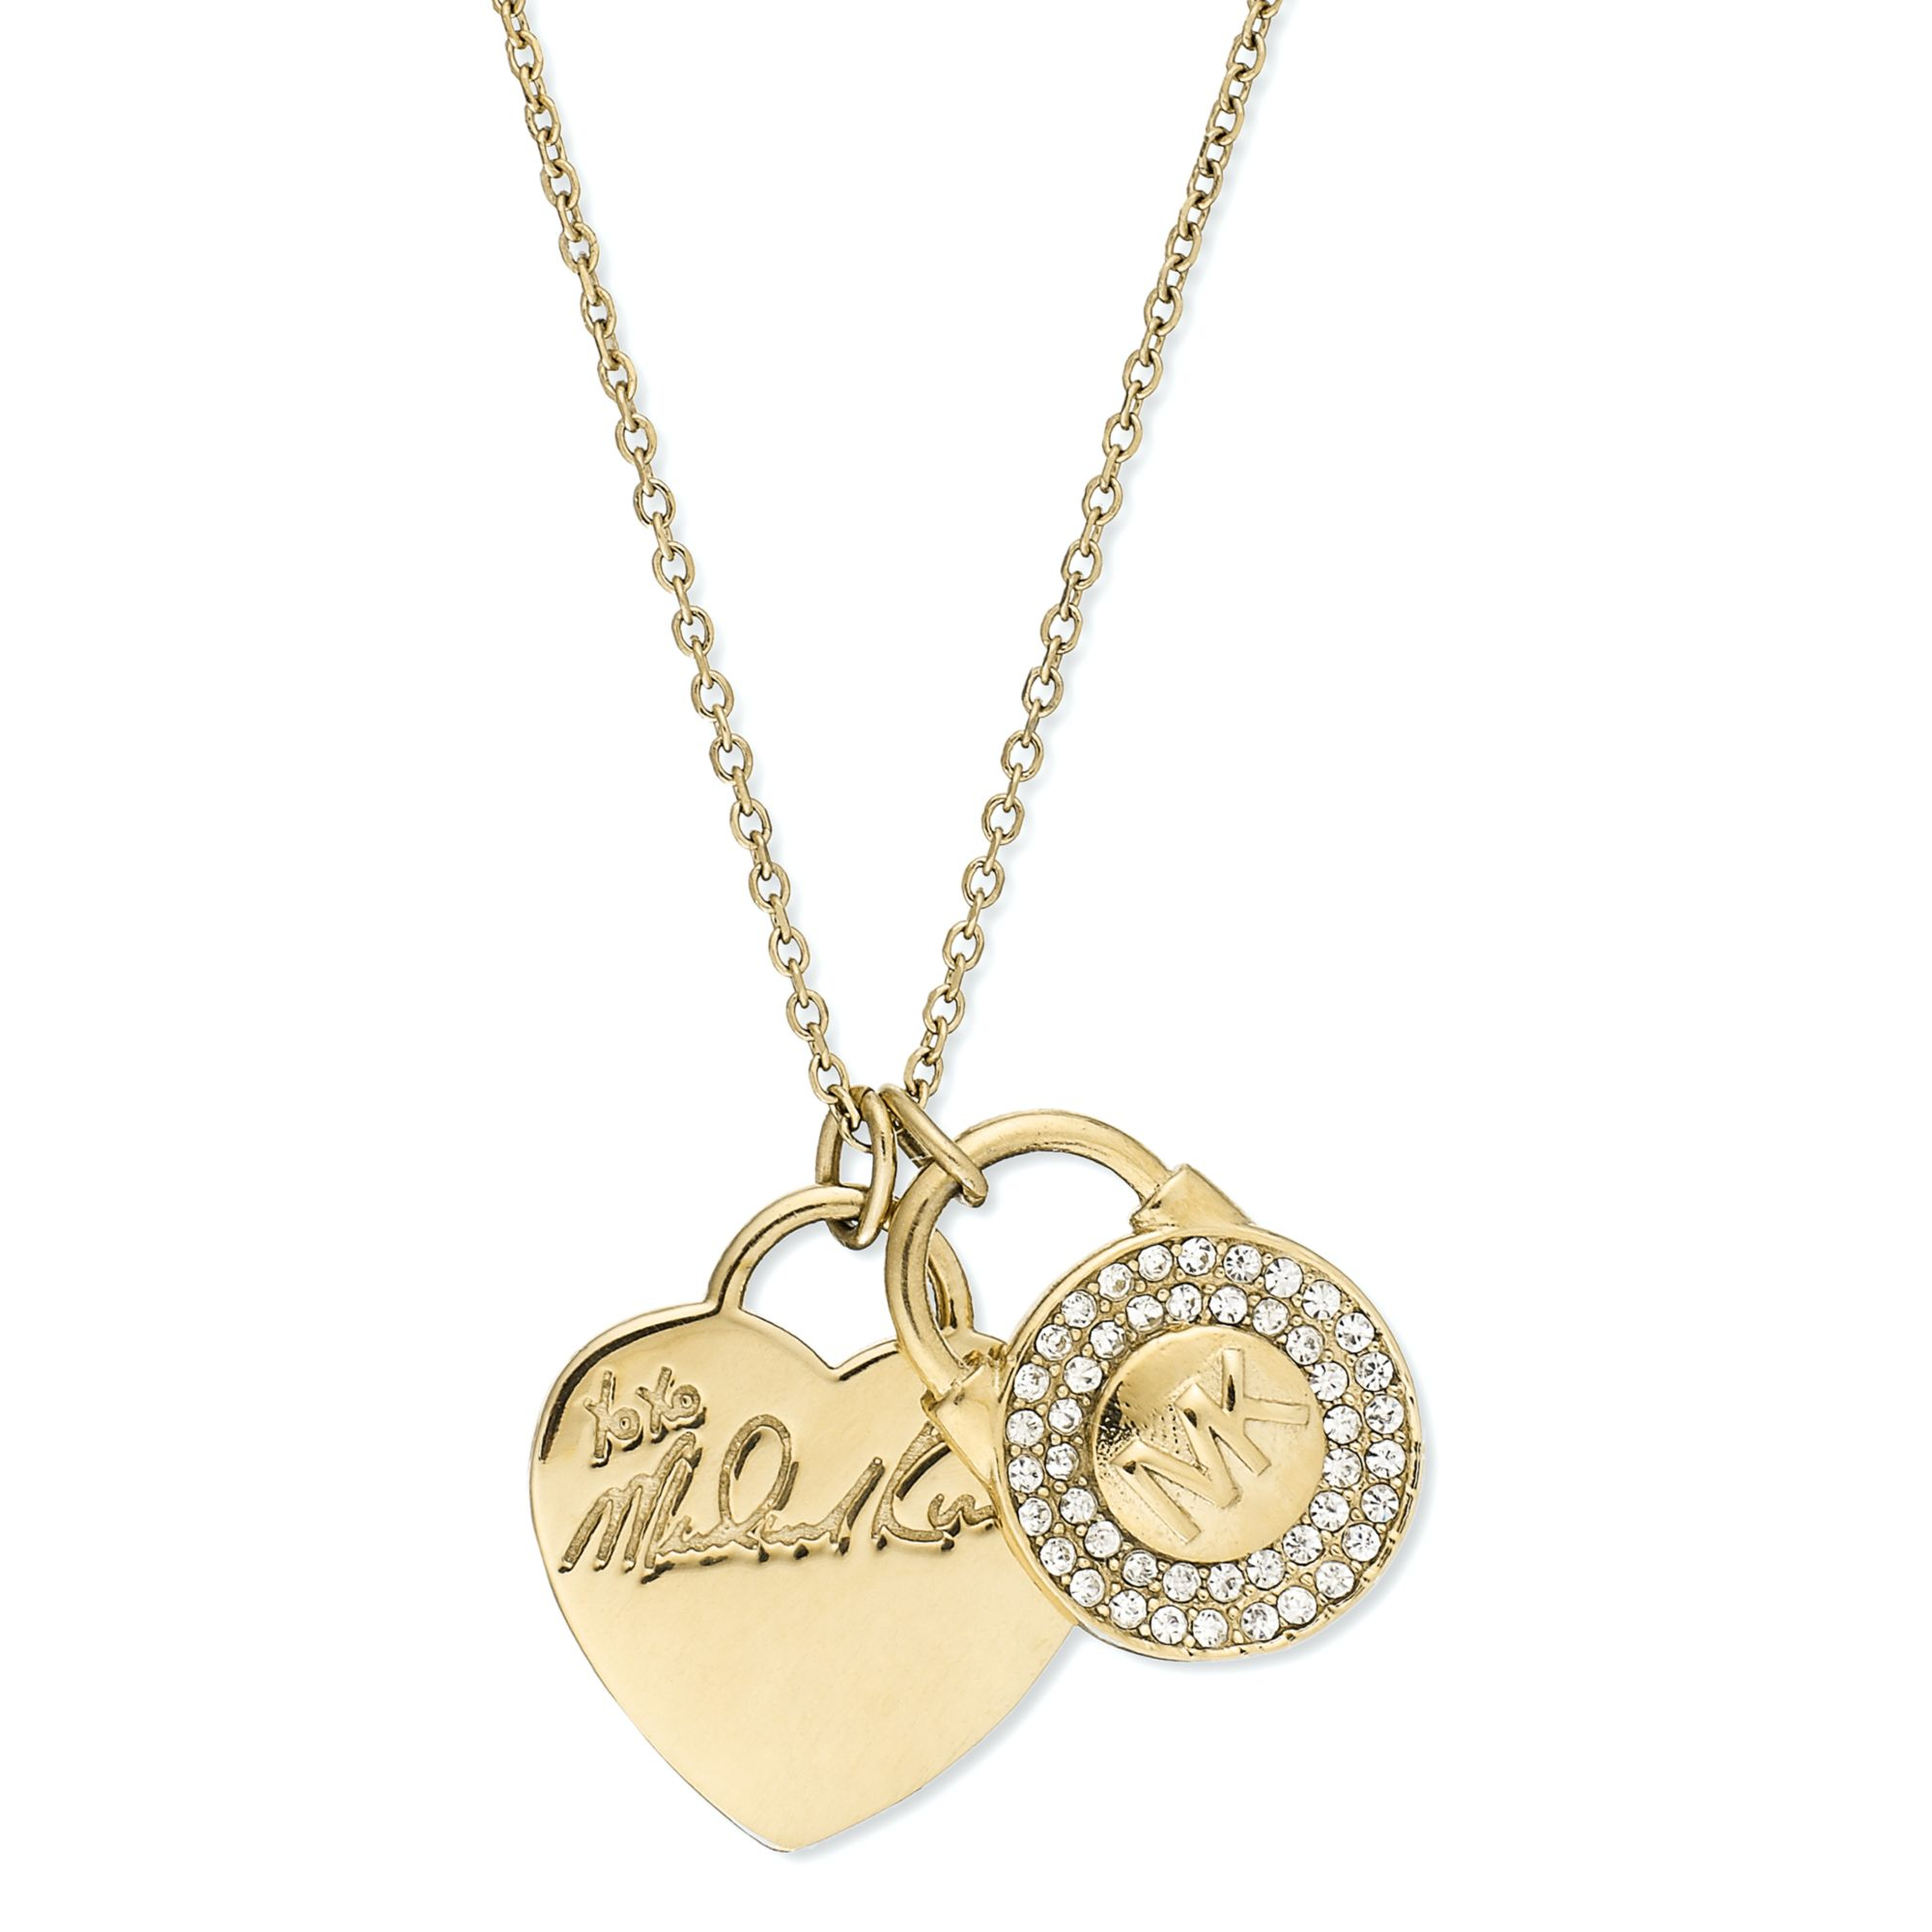 Michael Kors Goldtone Heart and Pave Lock Charm Necklace A Macys Exclusive in Gold | Lyst